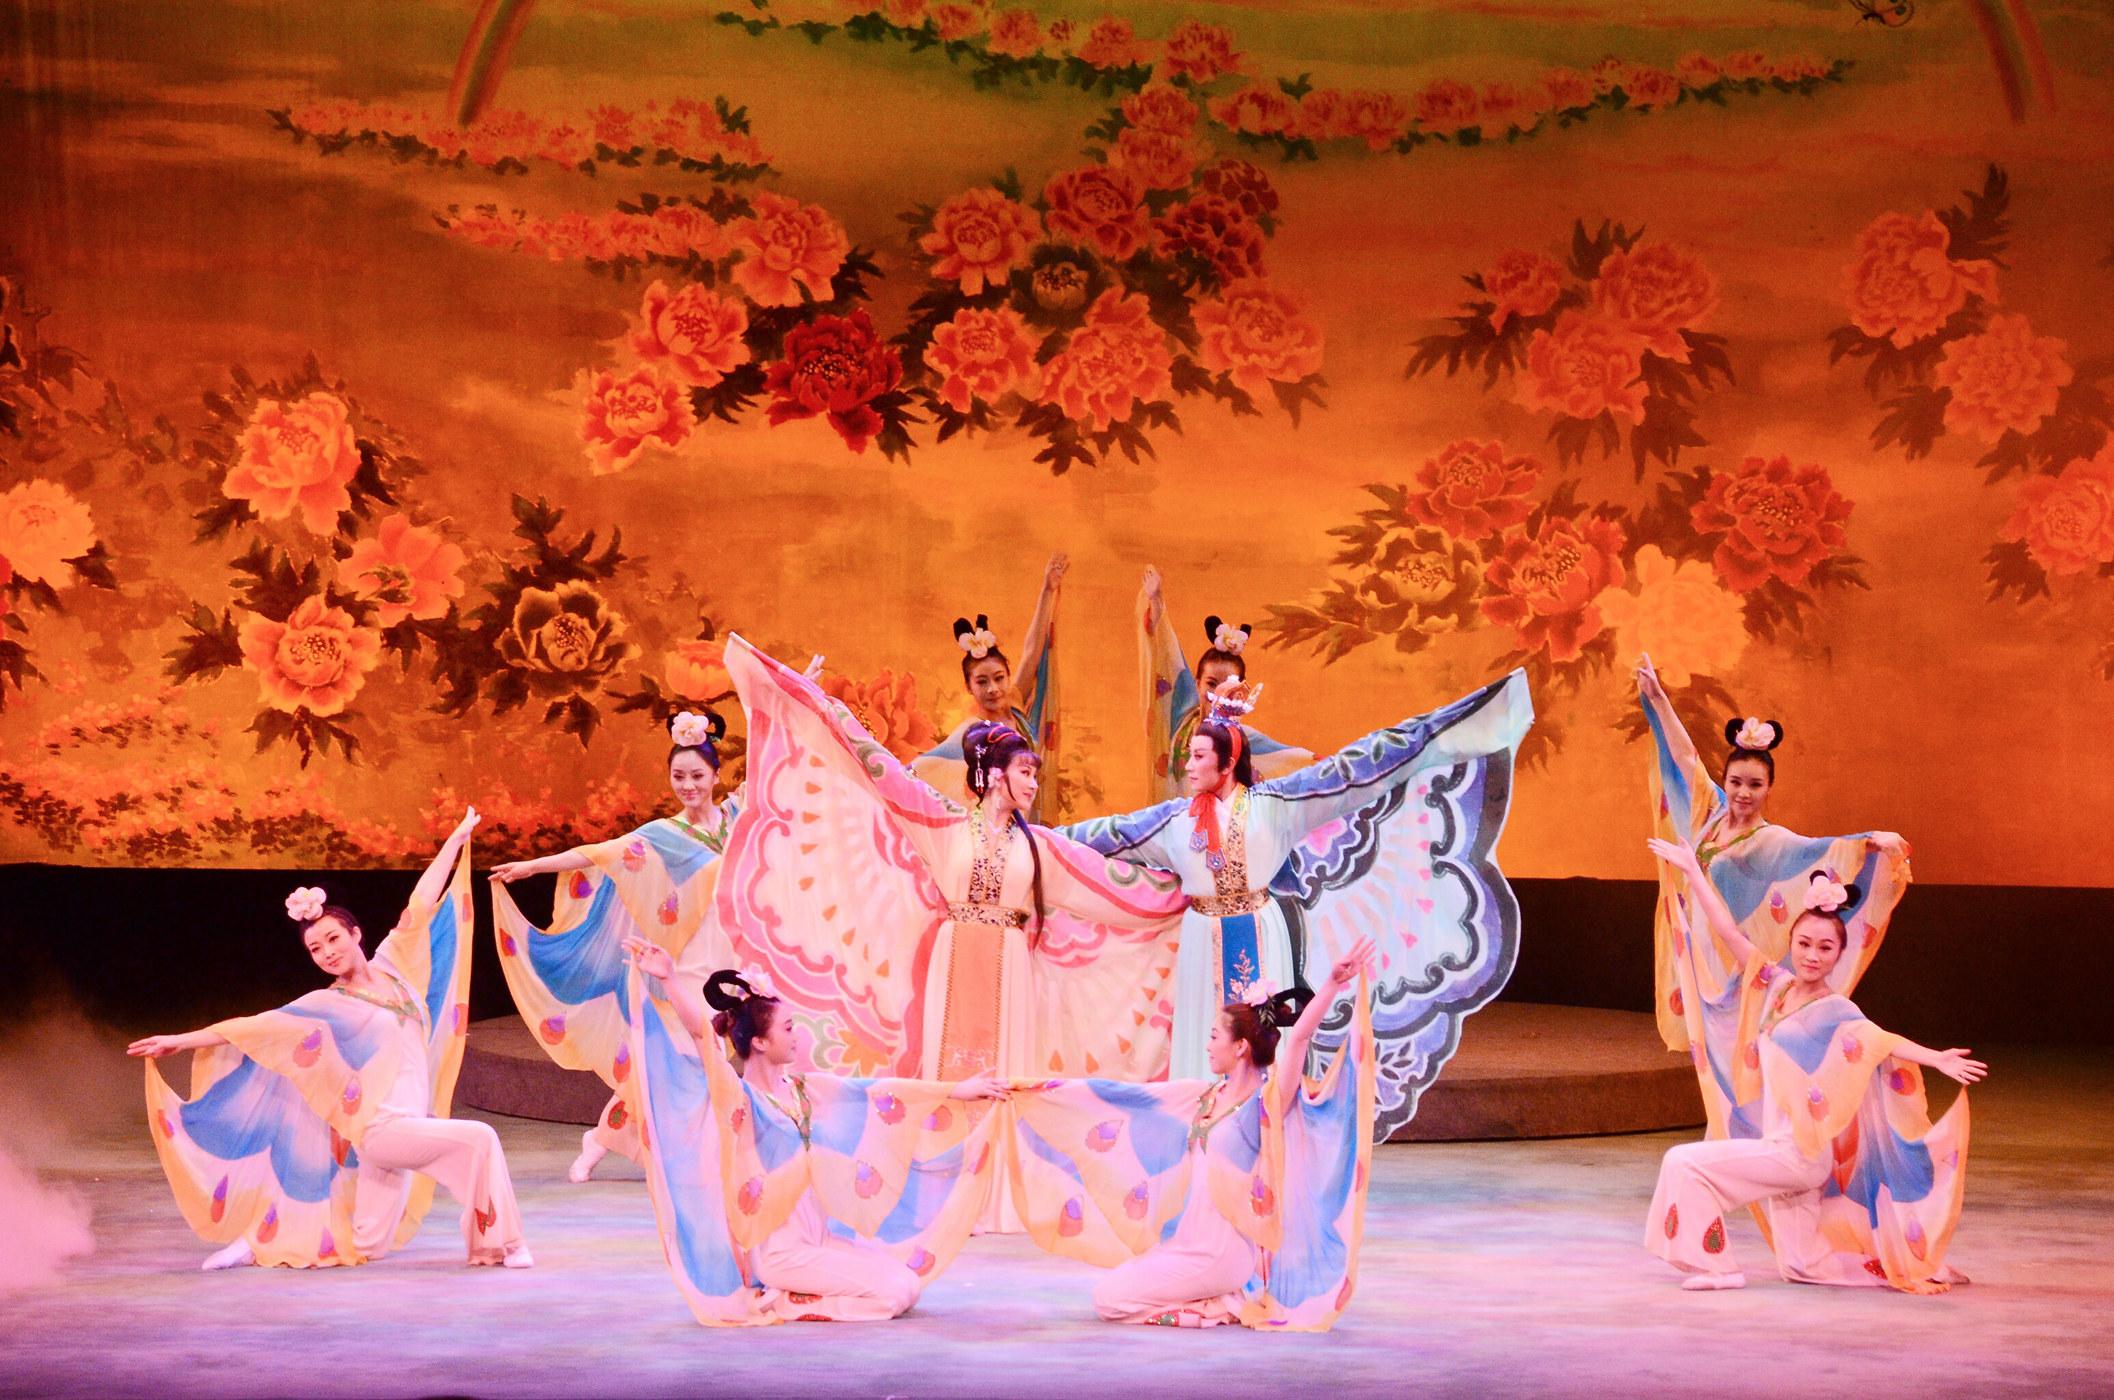 Over 10 renowned winners of the China Theatre Plum Blossom Award of Yue opera will visit Hong Kong for the programme "A Stellar Meet featuring Plum Blossom Award Winners in Yue Opera" under the Chinese Opera Festival 2023 in August. Photo shows a scene from "The Butterfly Lovers".